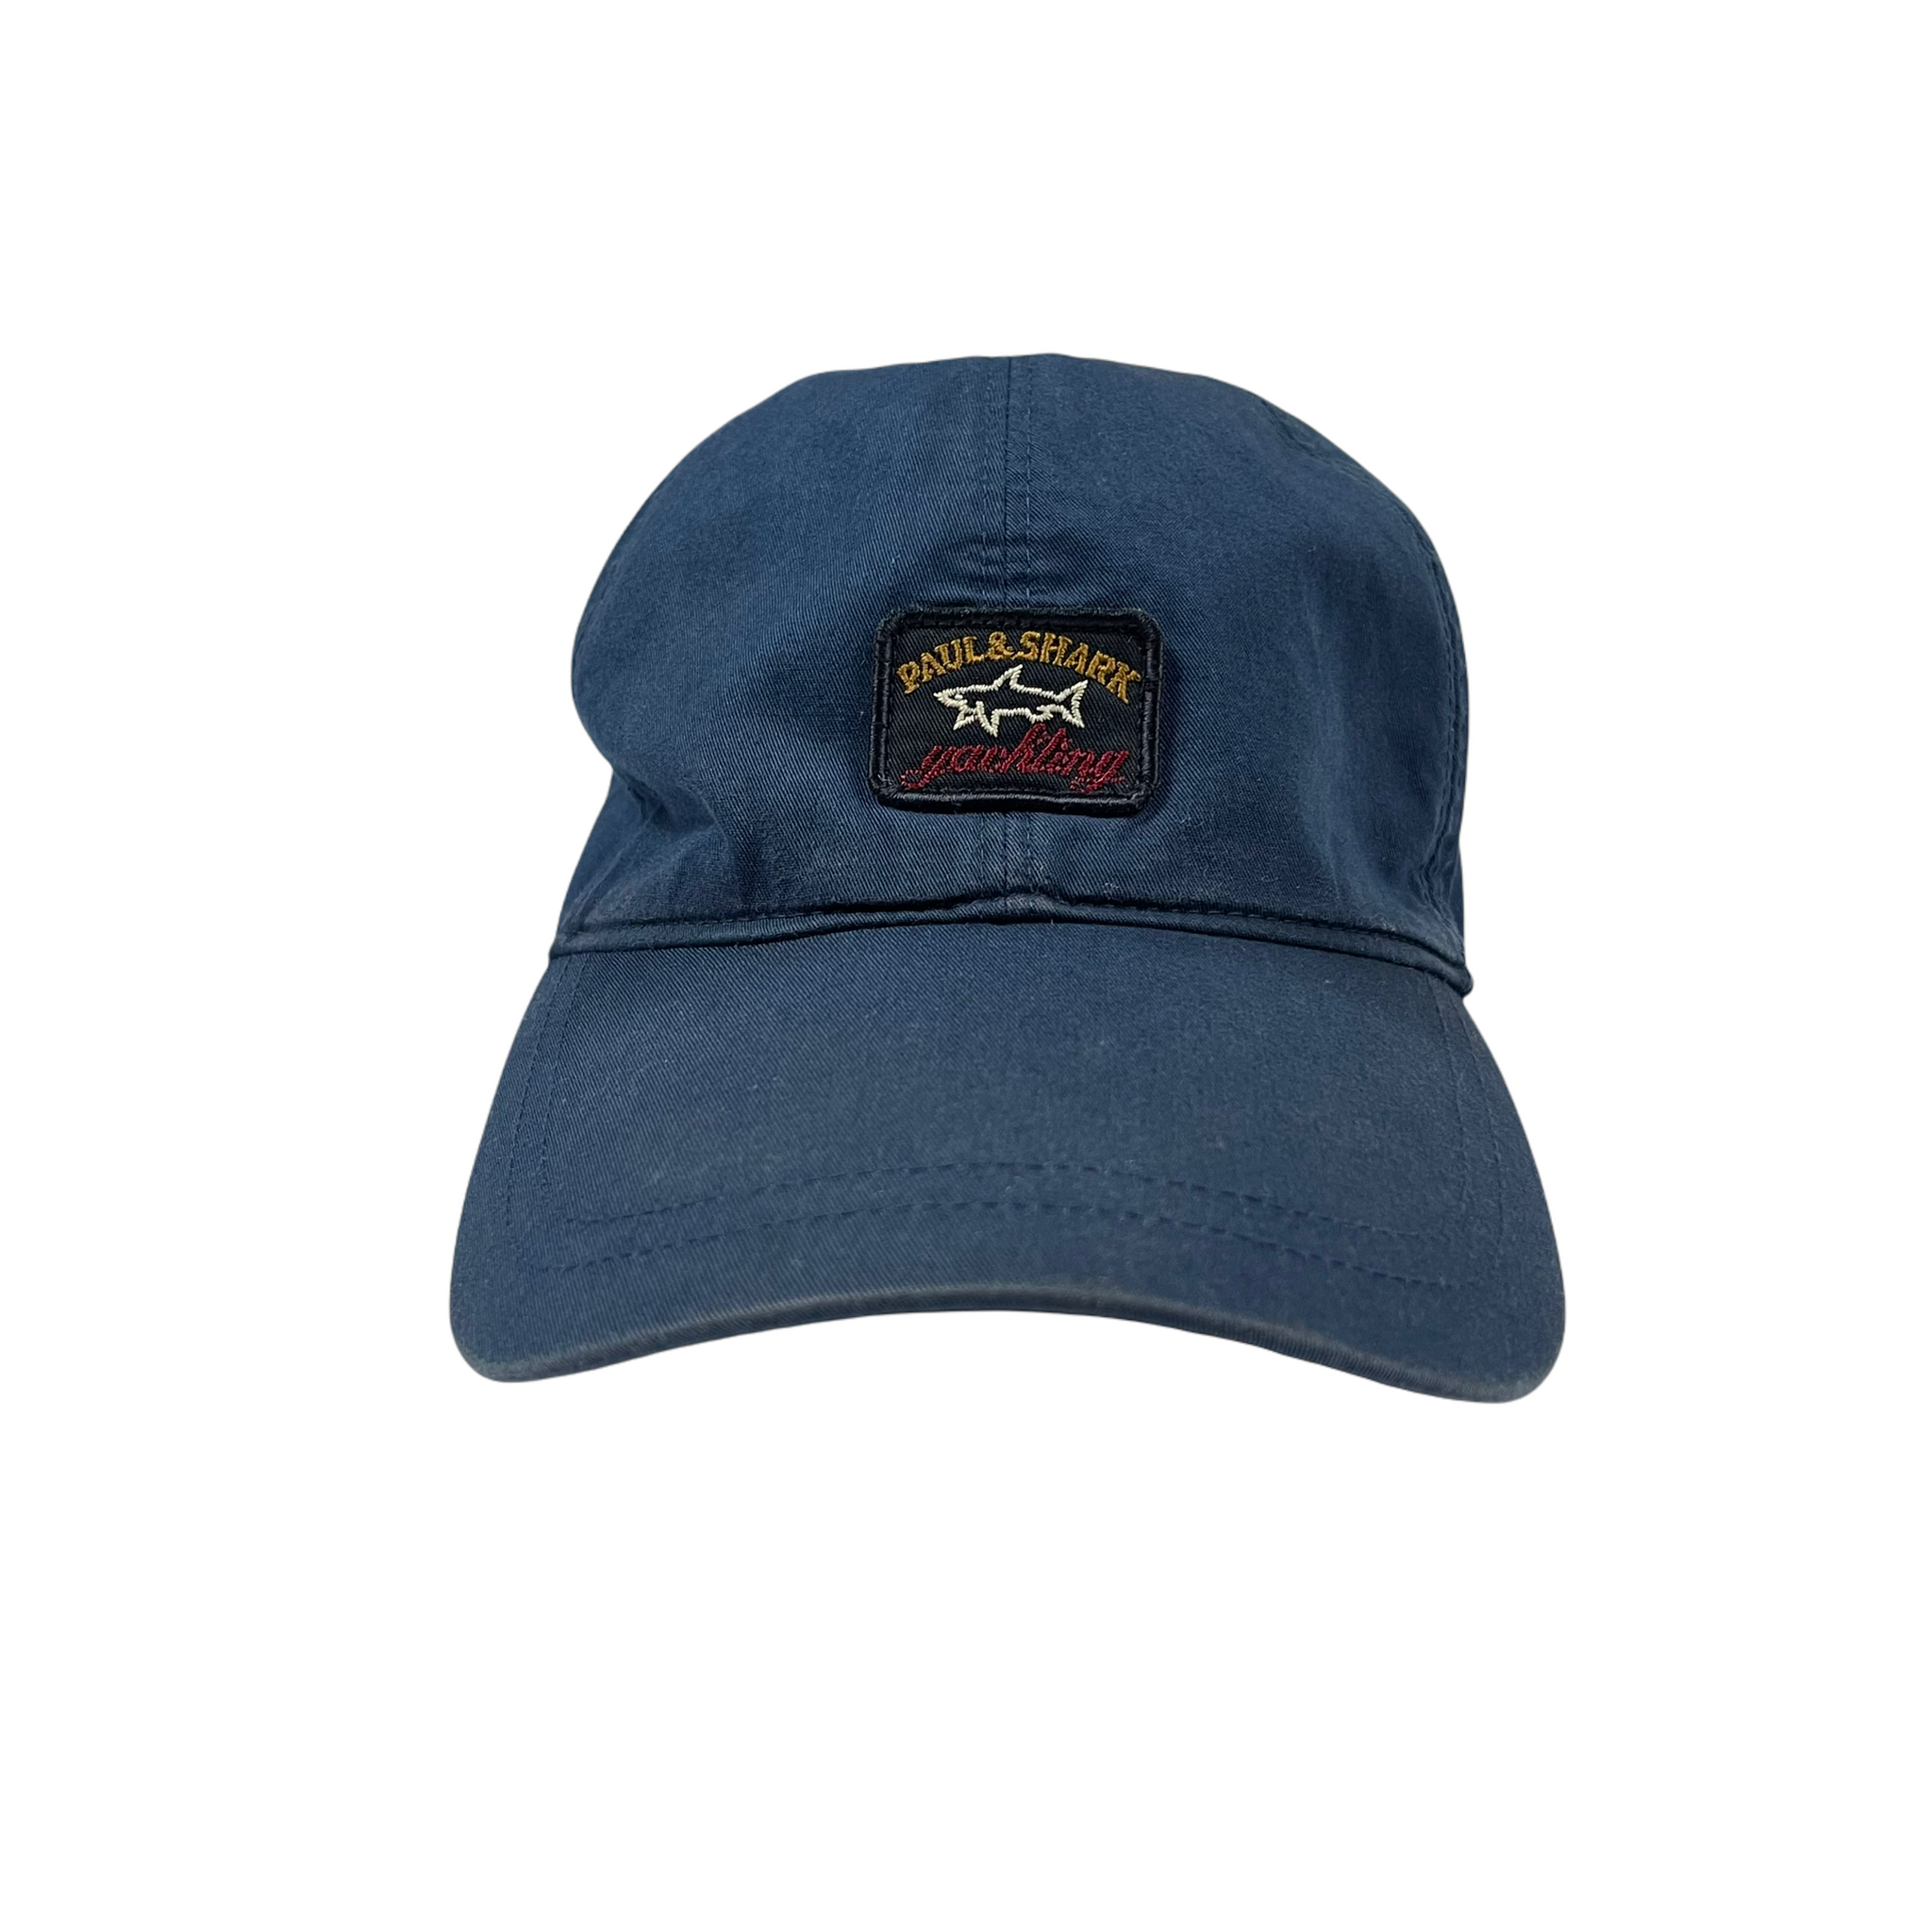 Paul and Shark Navy Blue Logo Cap - One Size Fits All – SWADS MENSWEAR